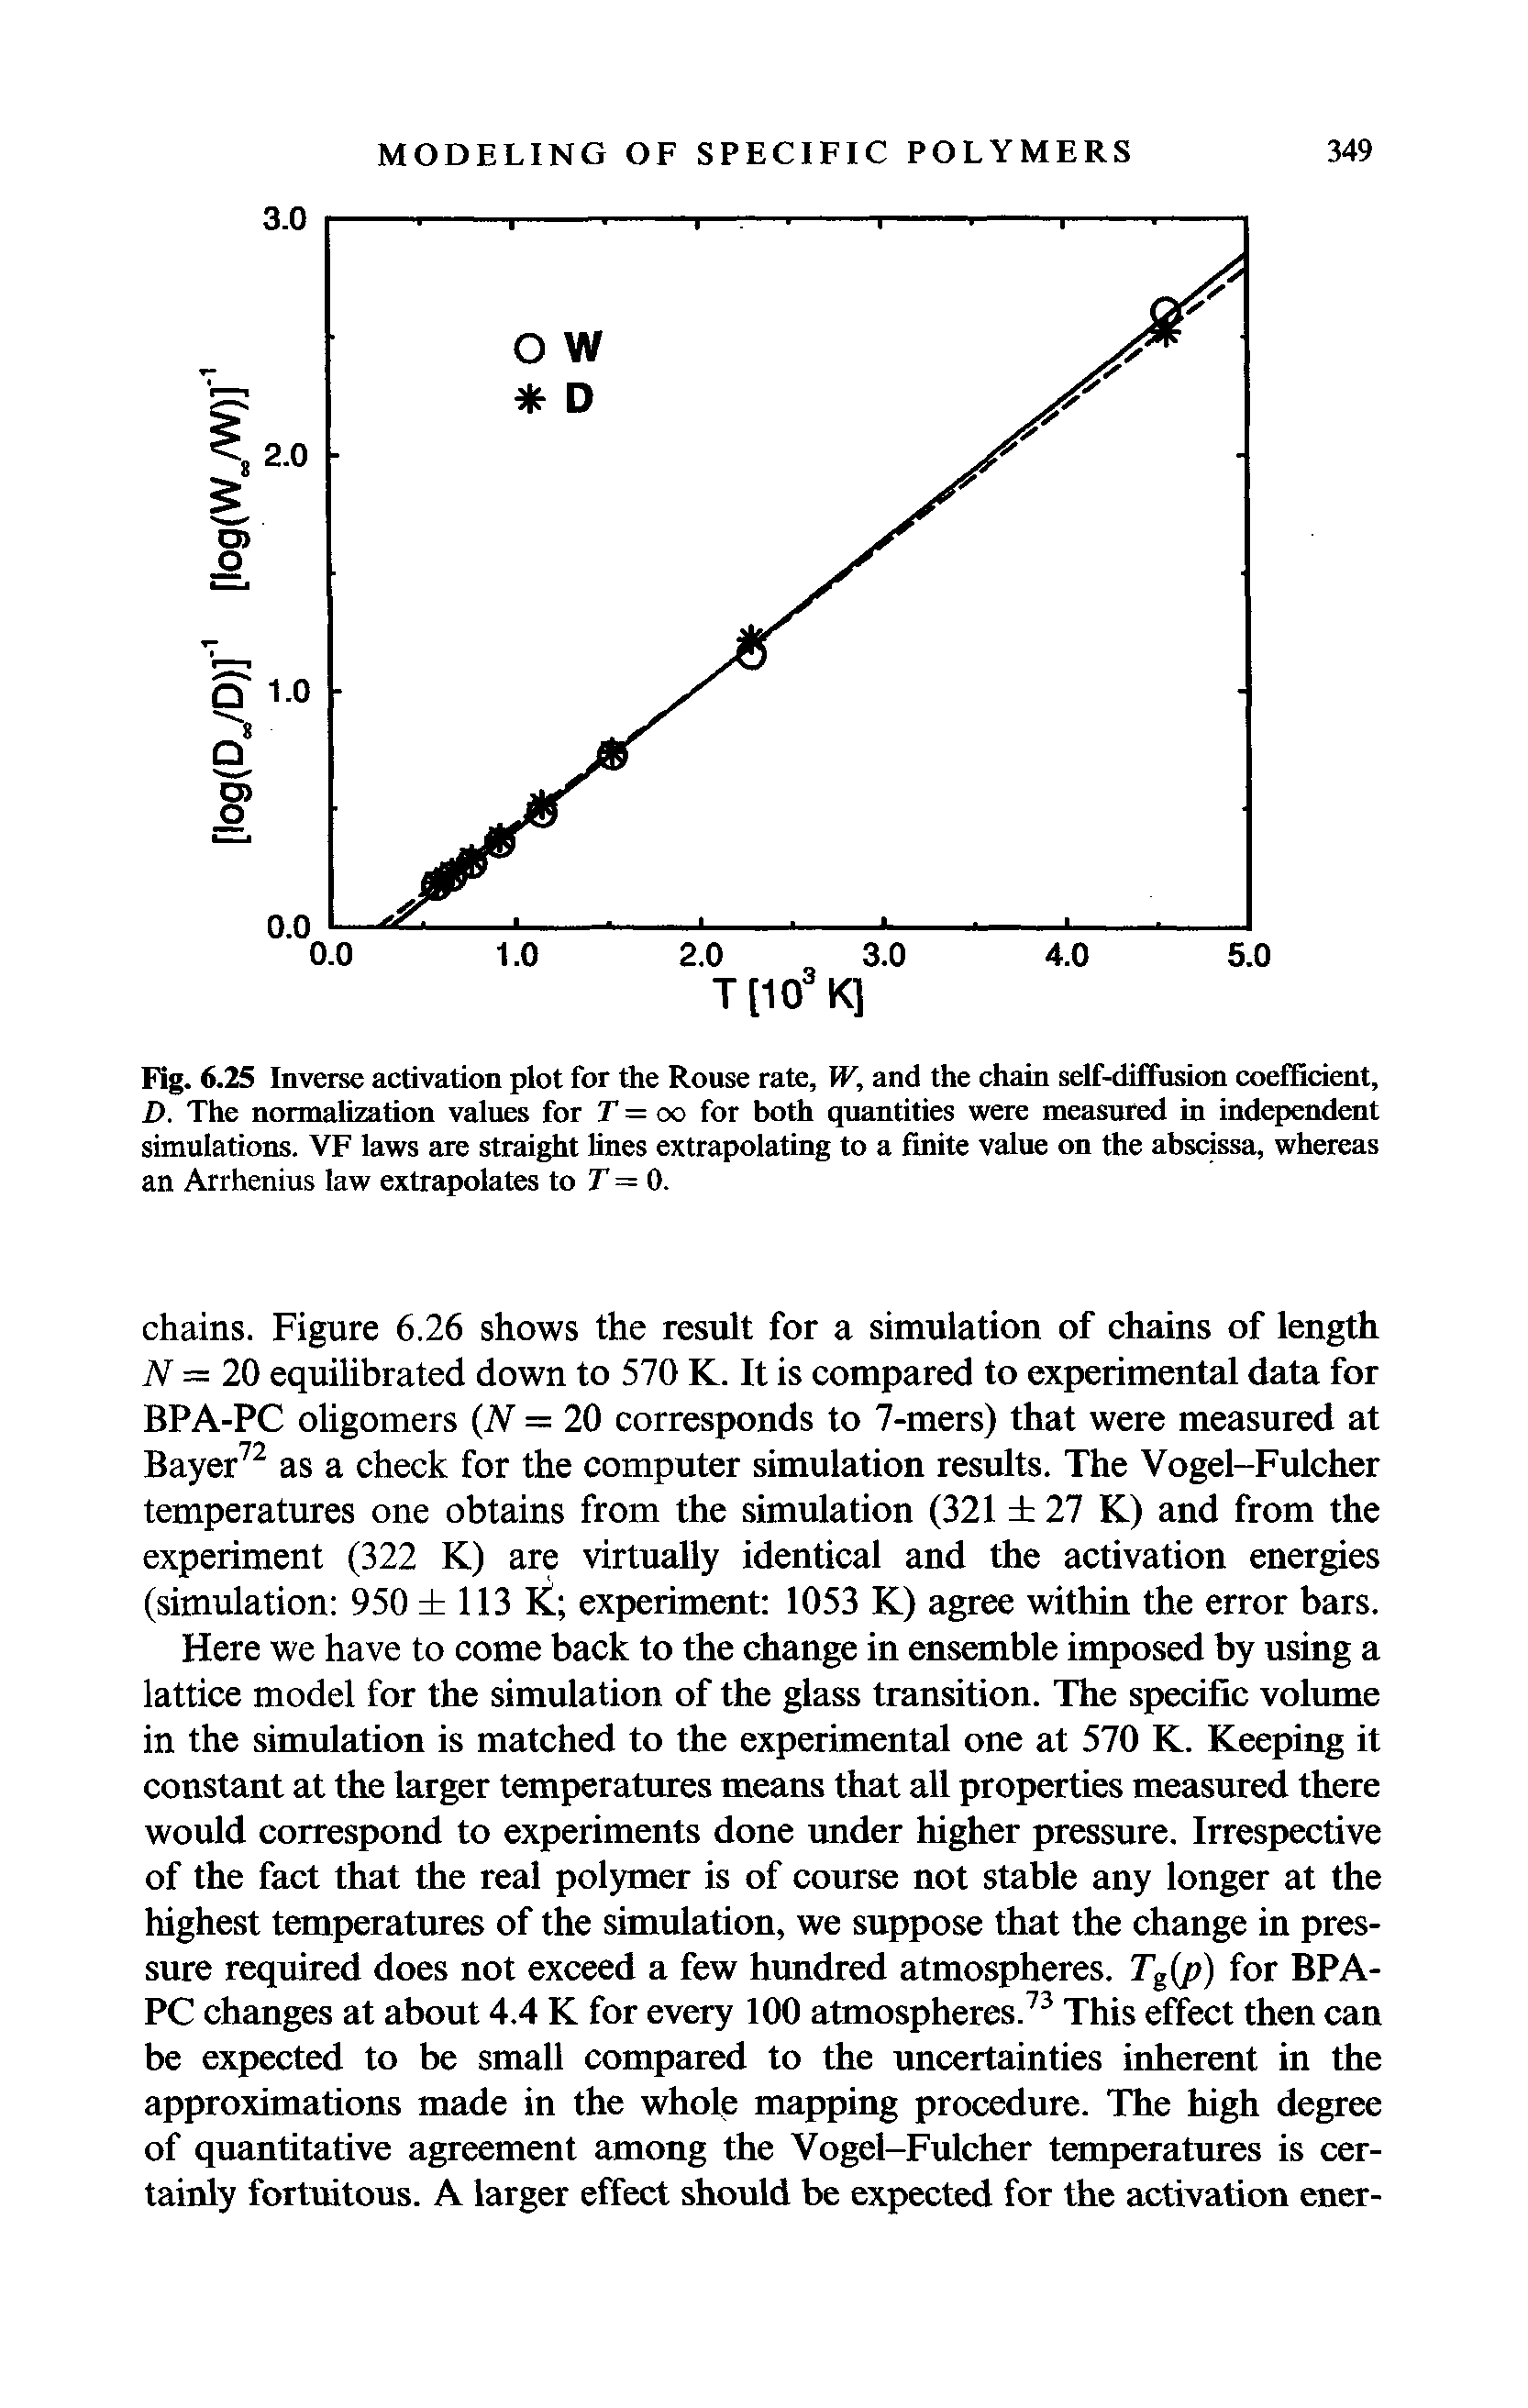 Fig. 6.25 Inverse aetivation plot for the Rouse rate, W, and the chain self-dillasion coefficient, D. The normalization values for T = oo for both quantities were measured in independent simulations. VF laws are straight lines extrapolating to a finite value on the abscissa, whereas an Arrhenius law extrapolates to 7 = 0.